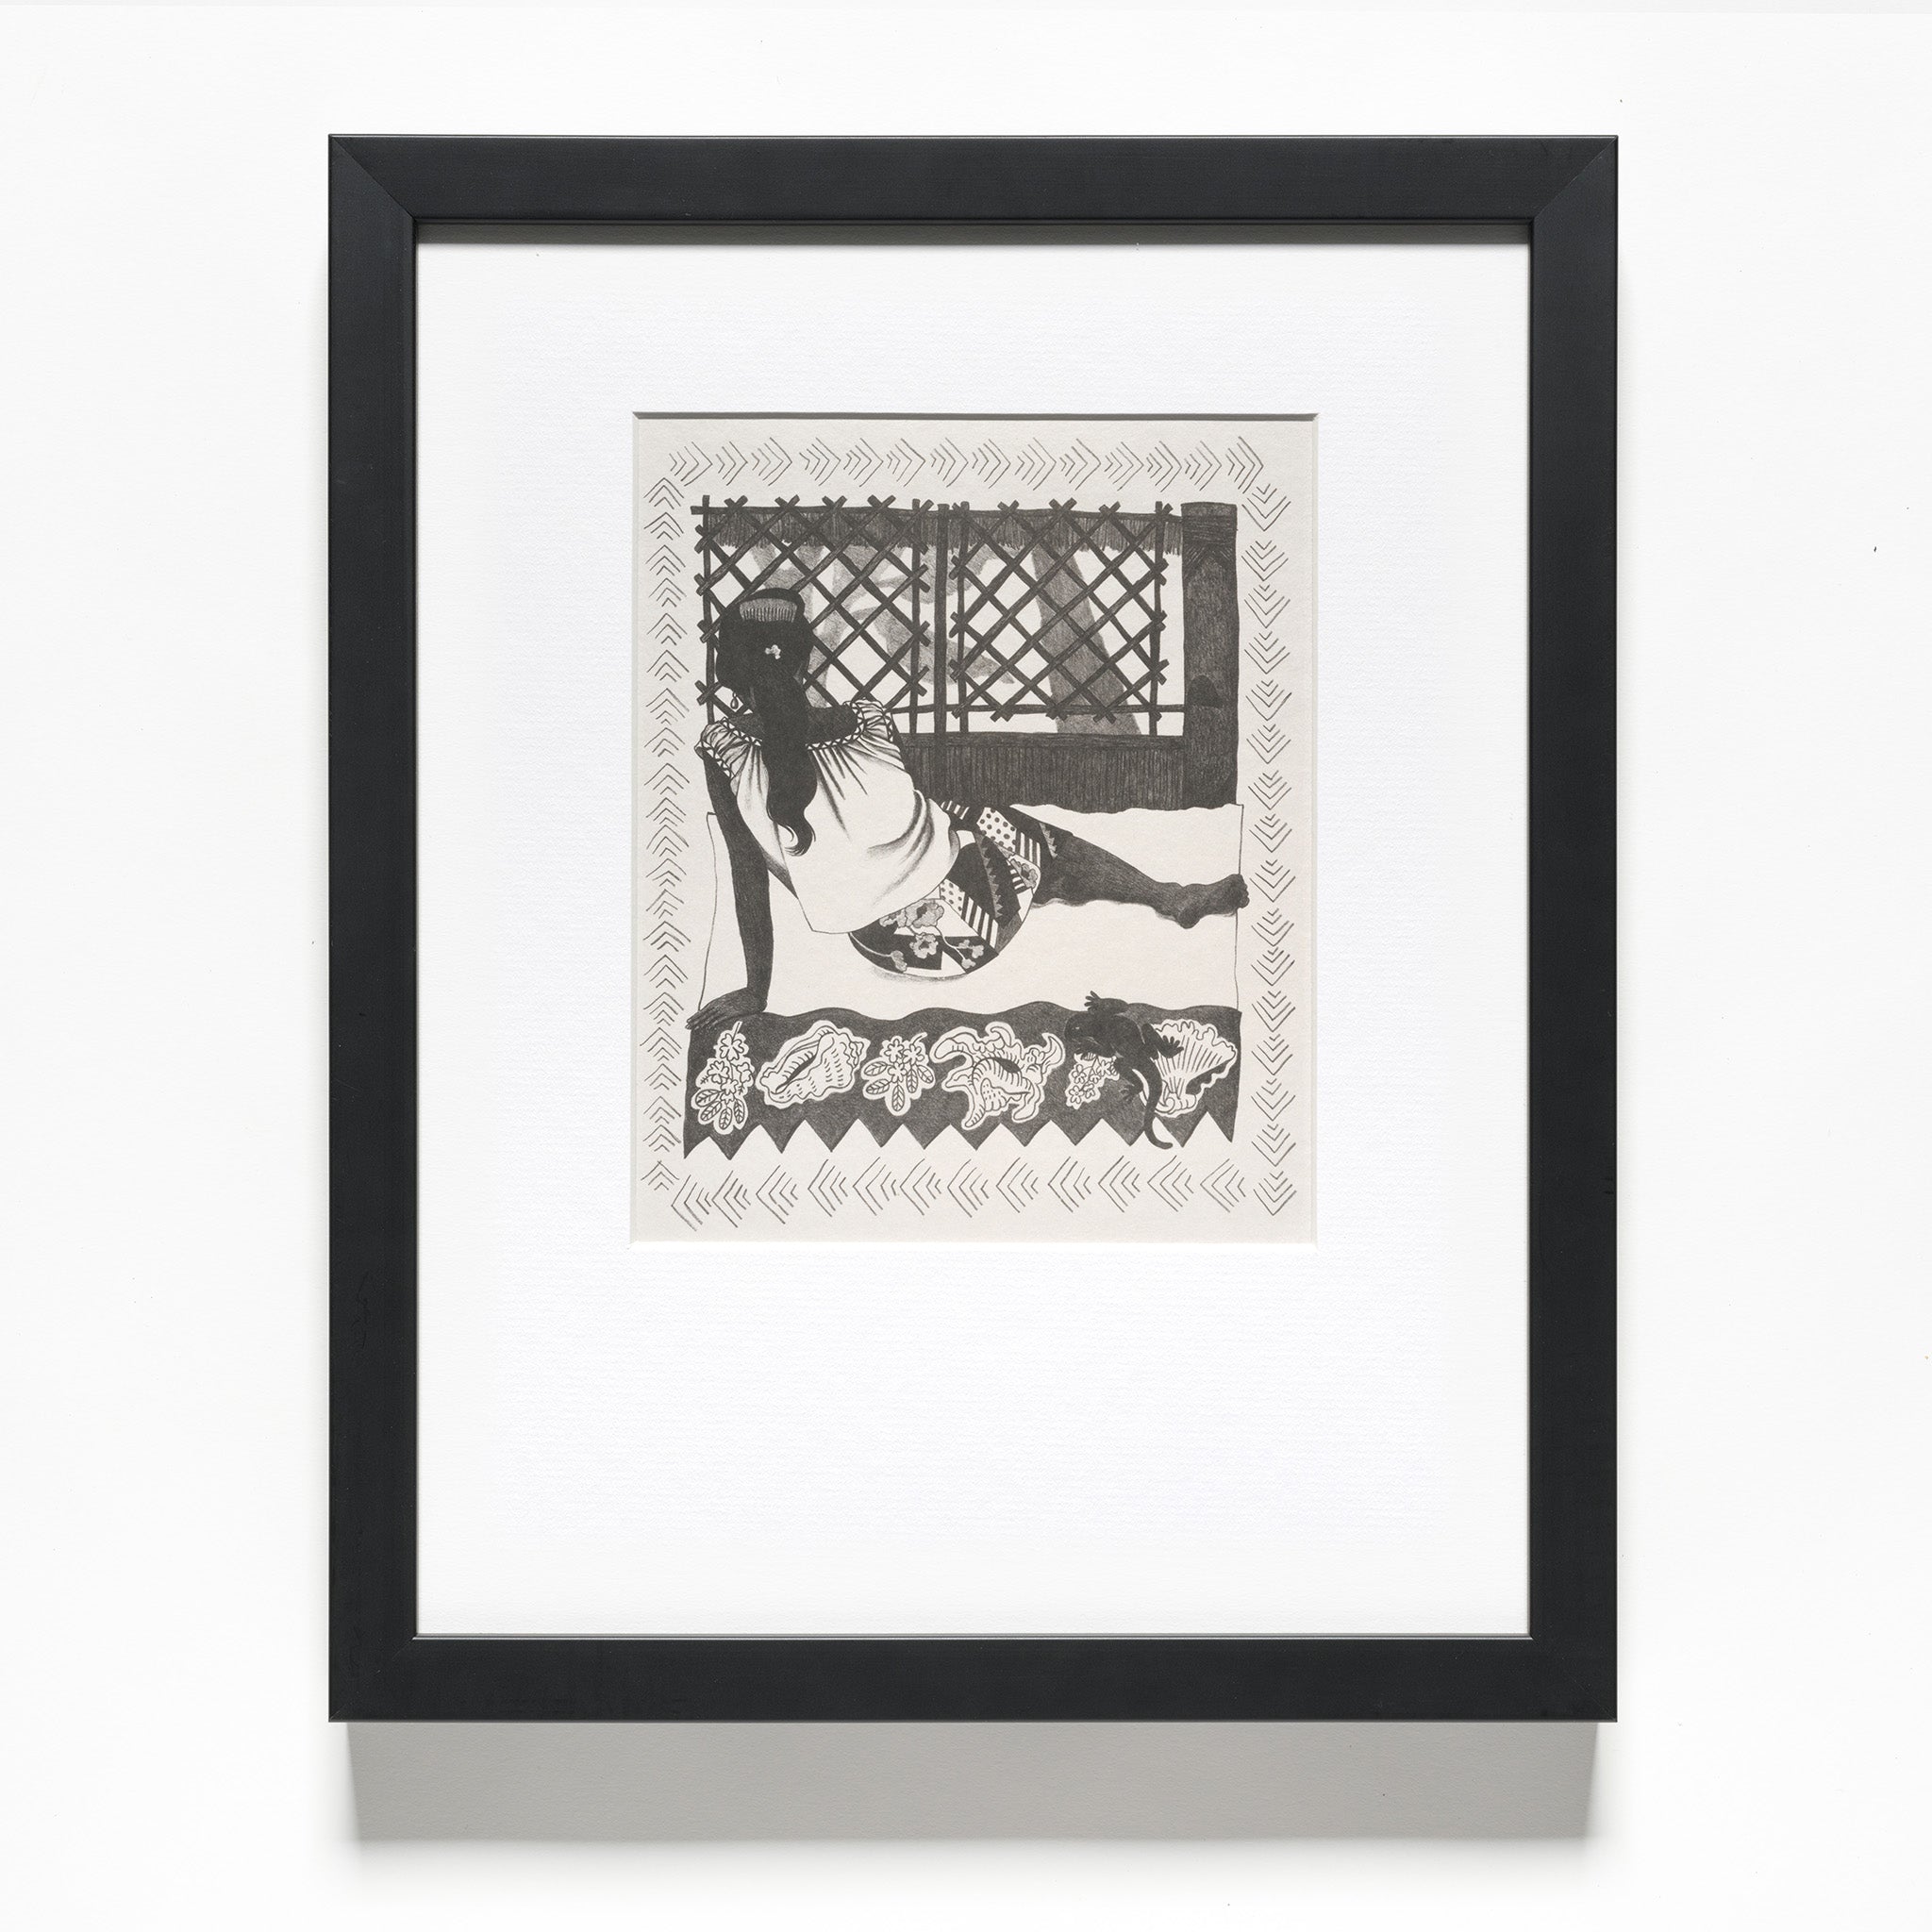 Robin White Florence with a Lizard Reproduction Print